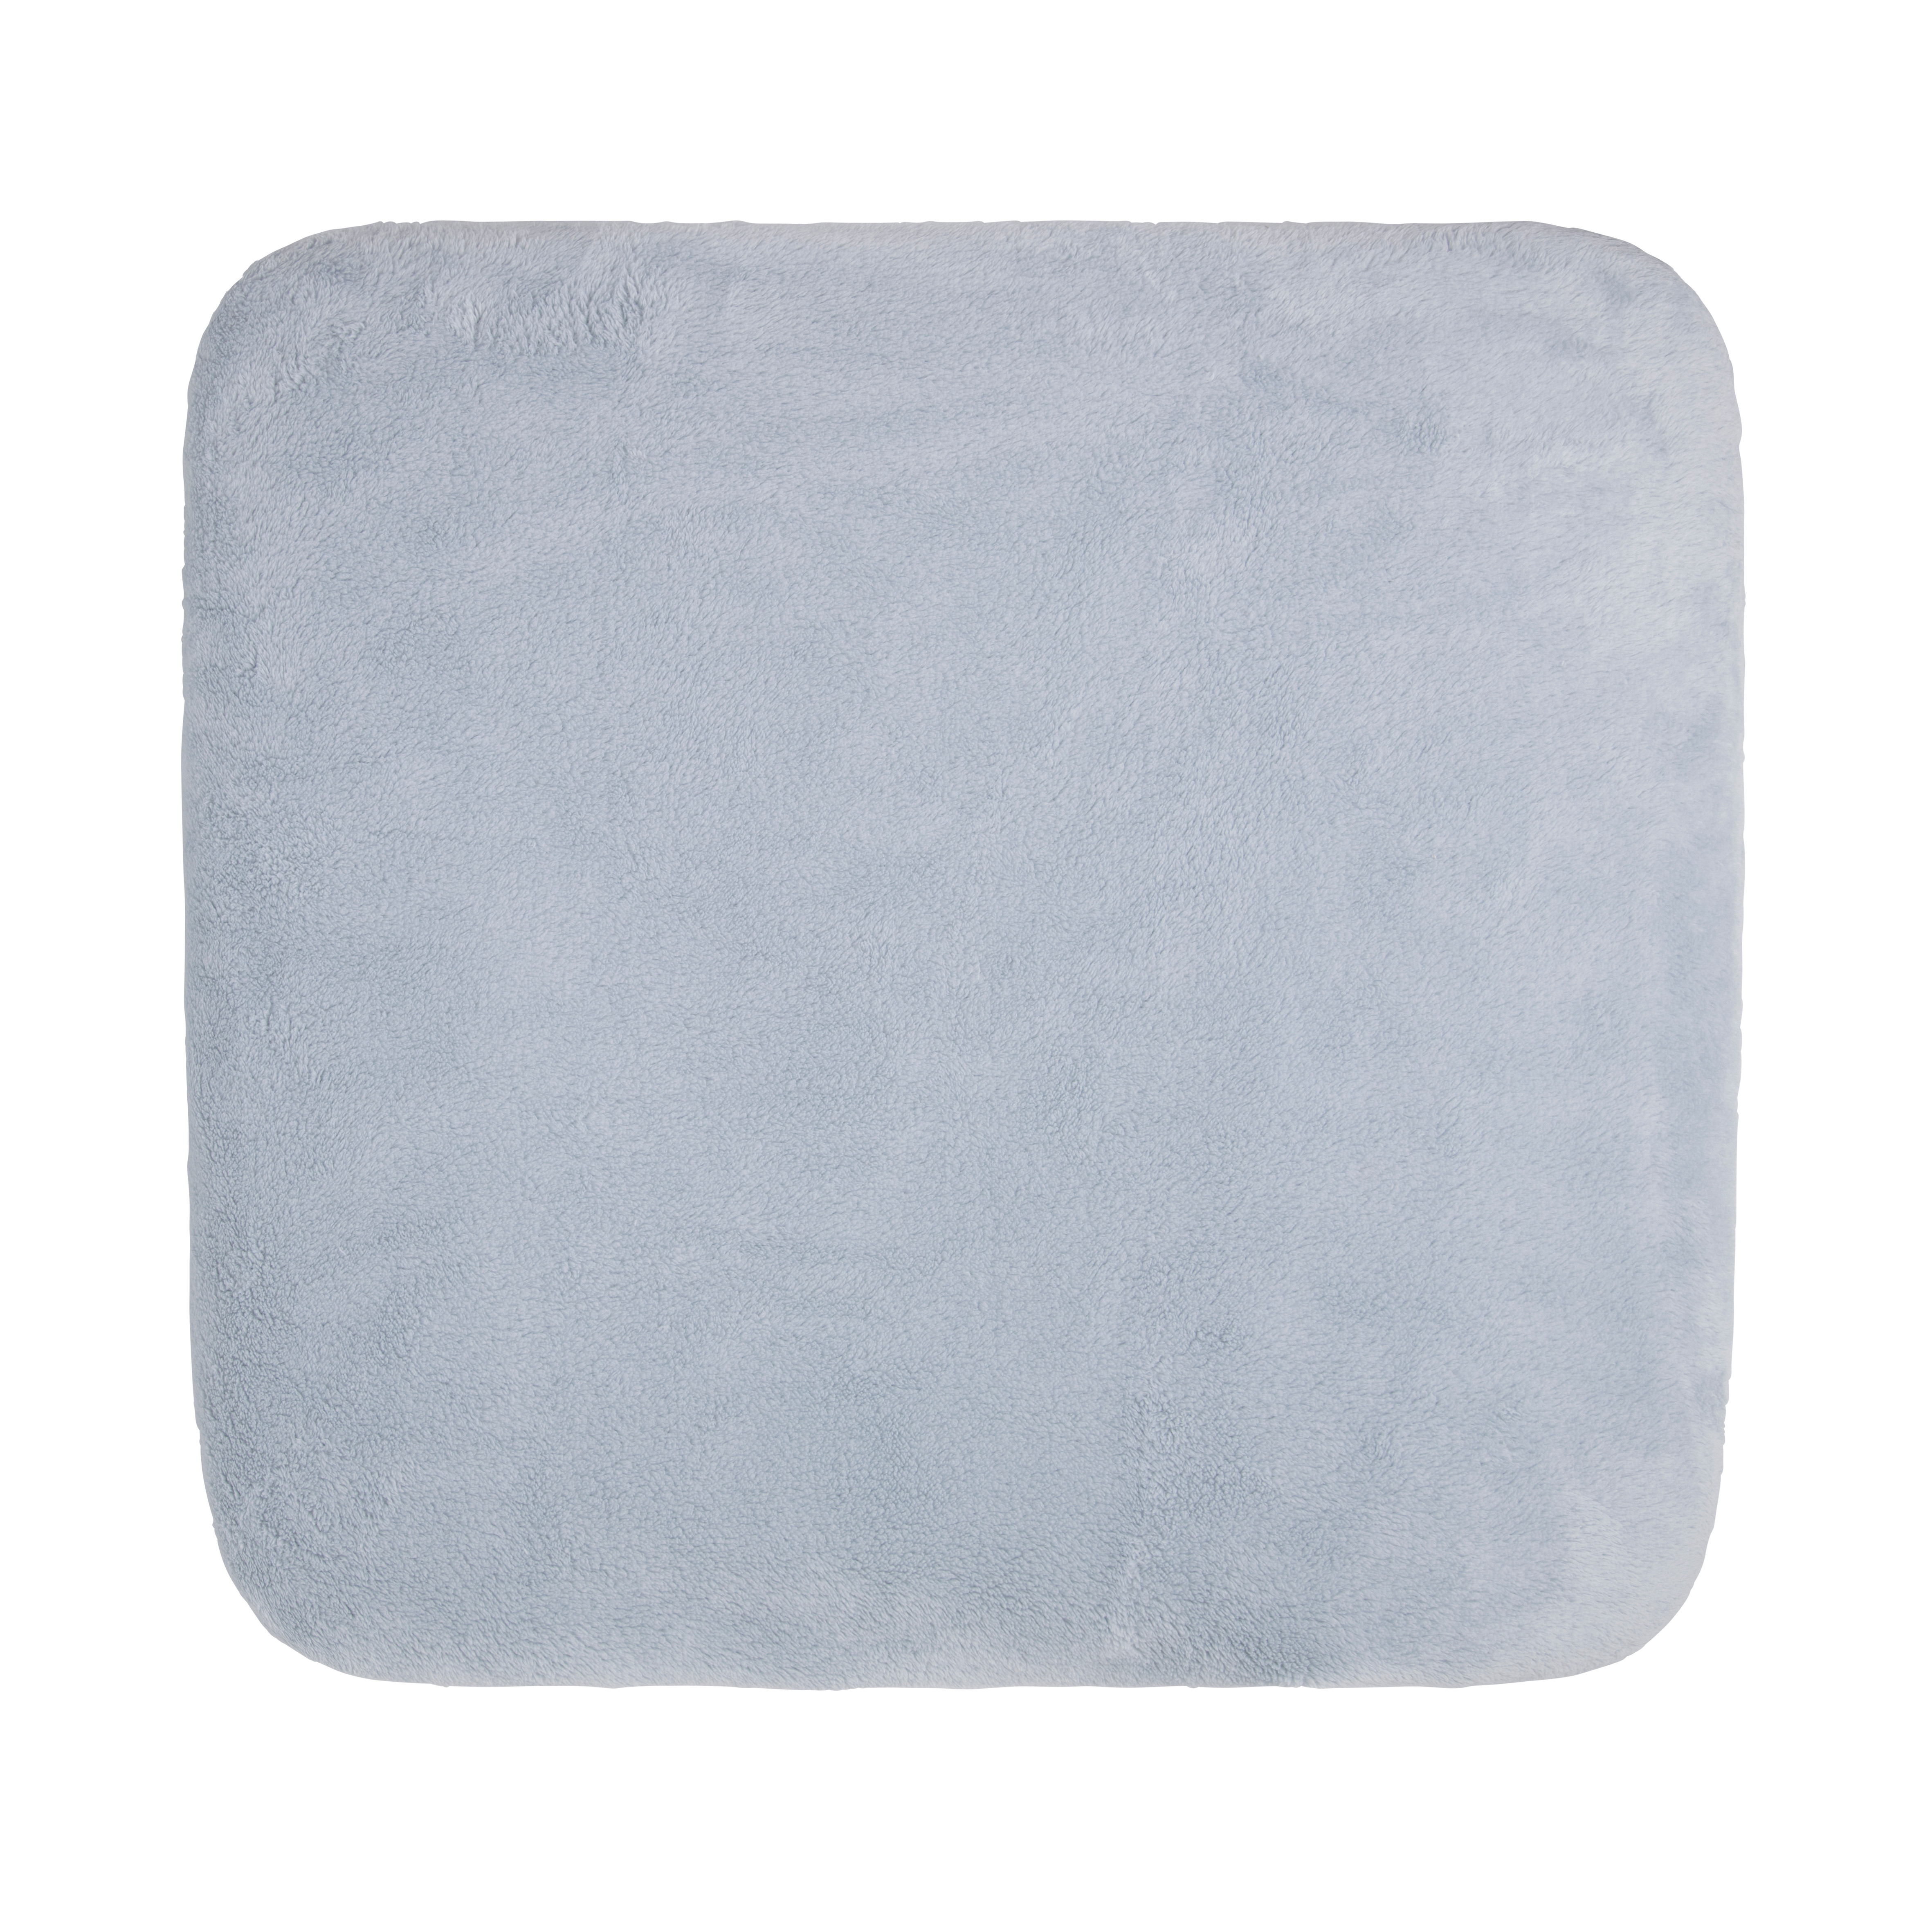 Changing pad cover Cozy misty blue - 75x85